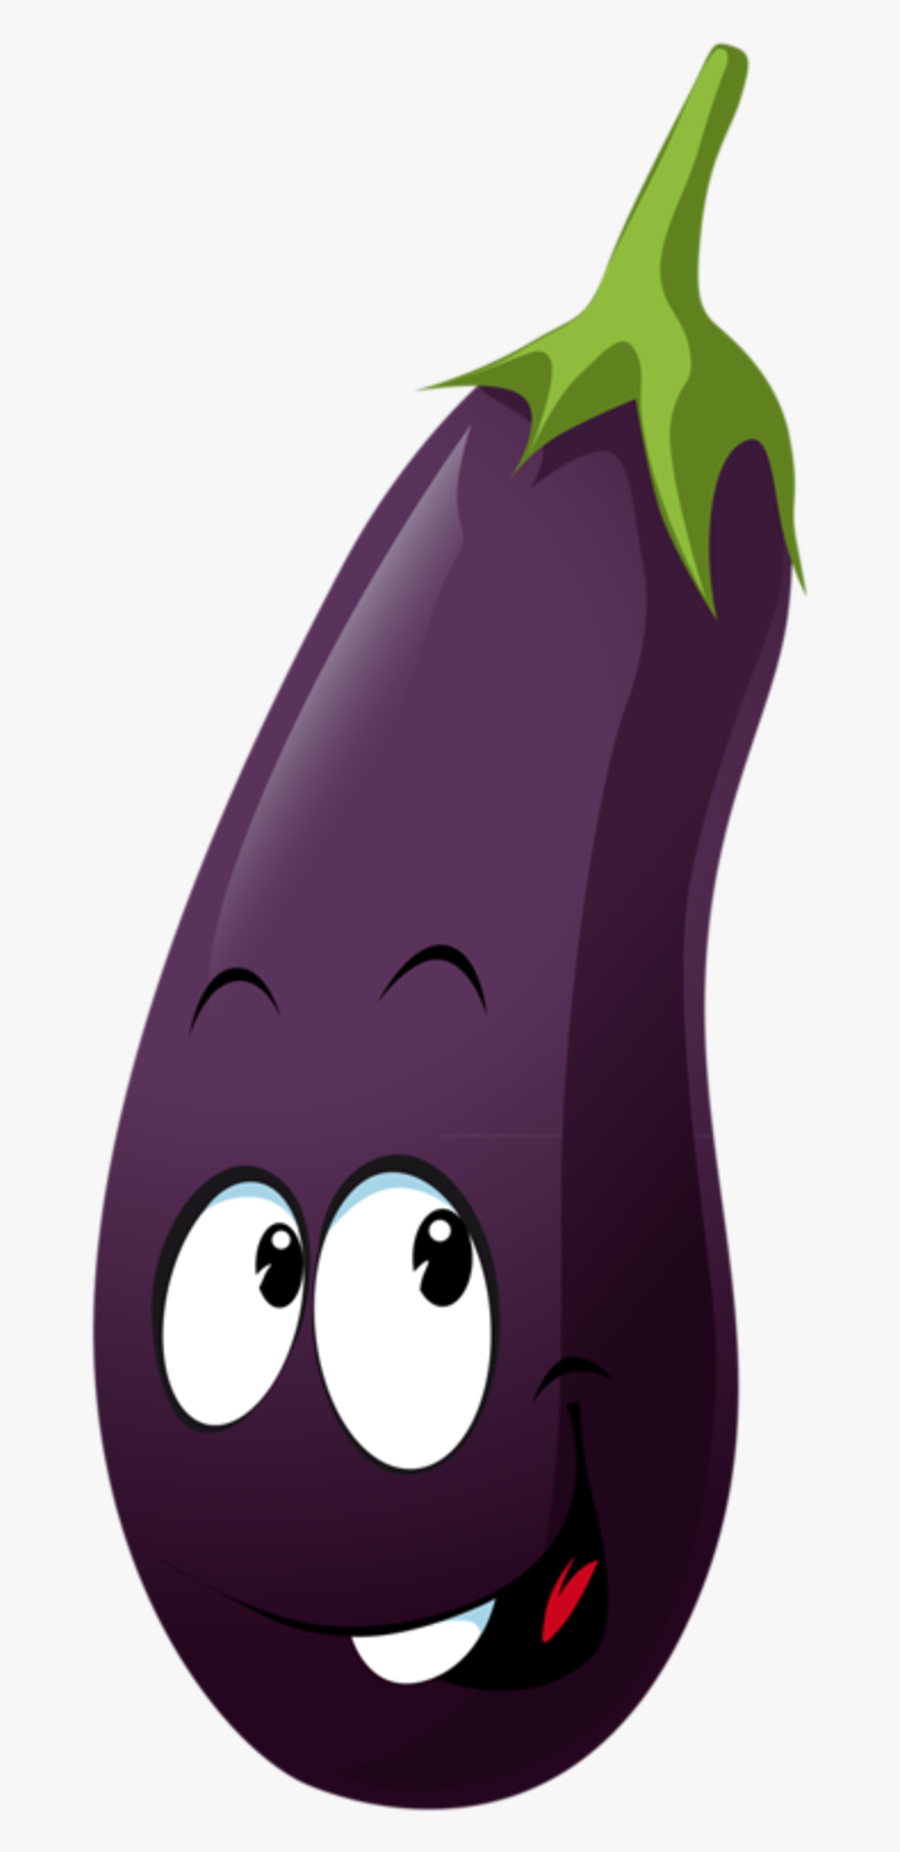 Eggplant Clipart Objects - Fruits And Vegetables Individual, Transparent Clipart